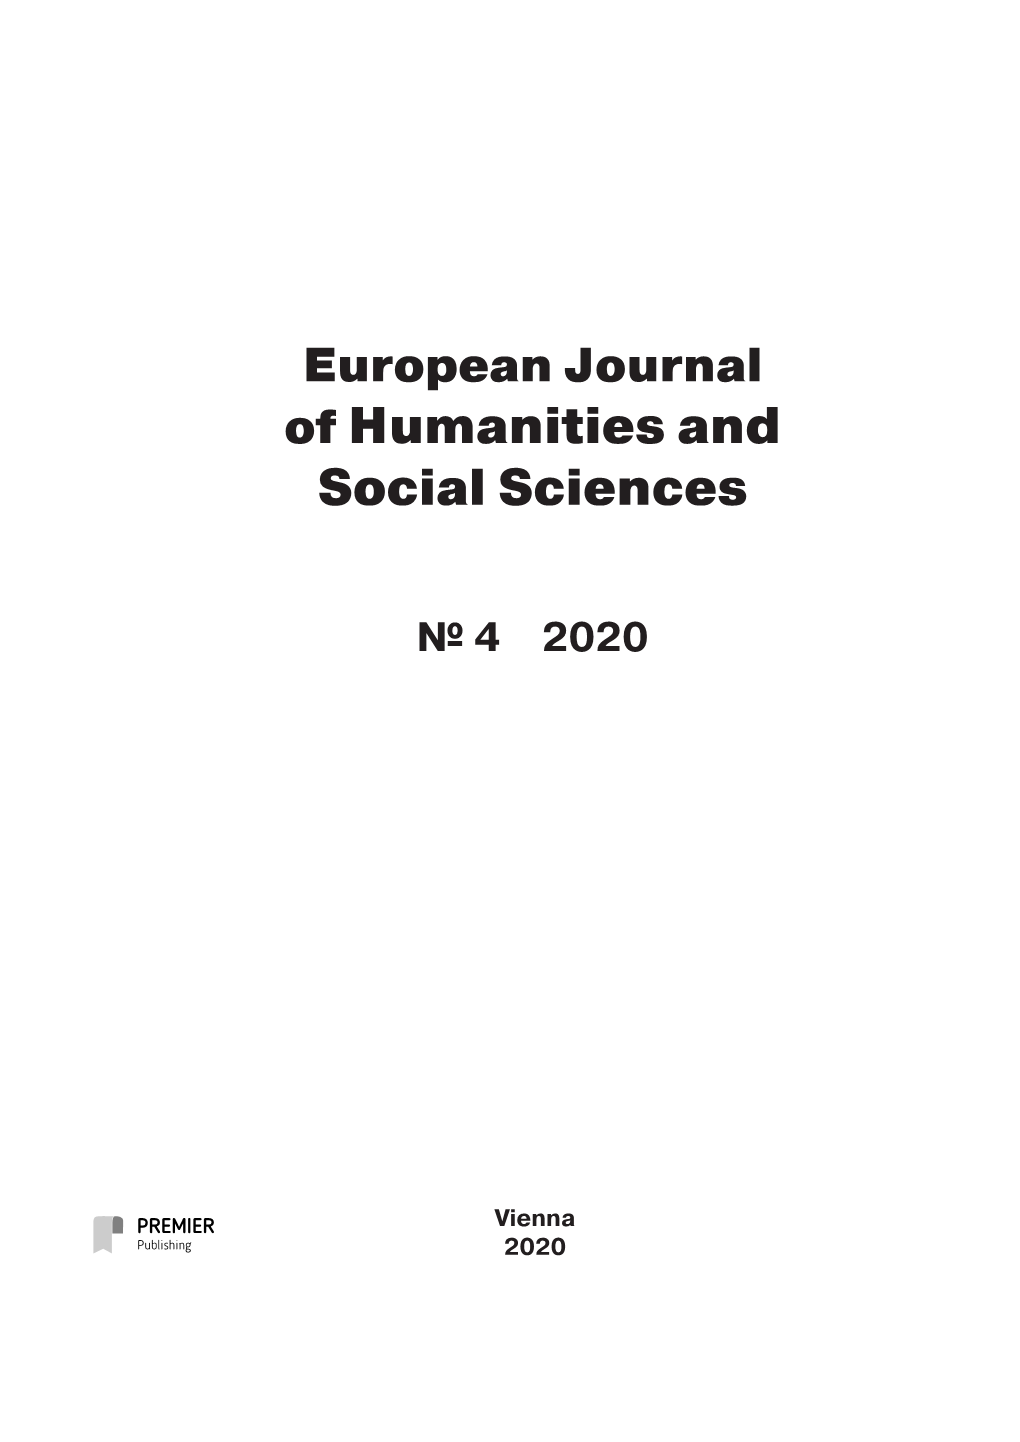 Of Humanities and Social Sciences